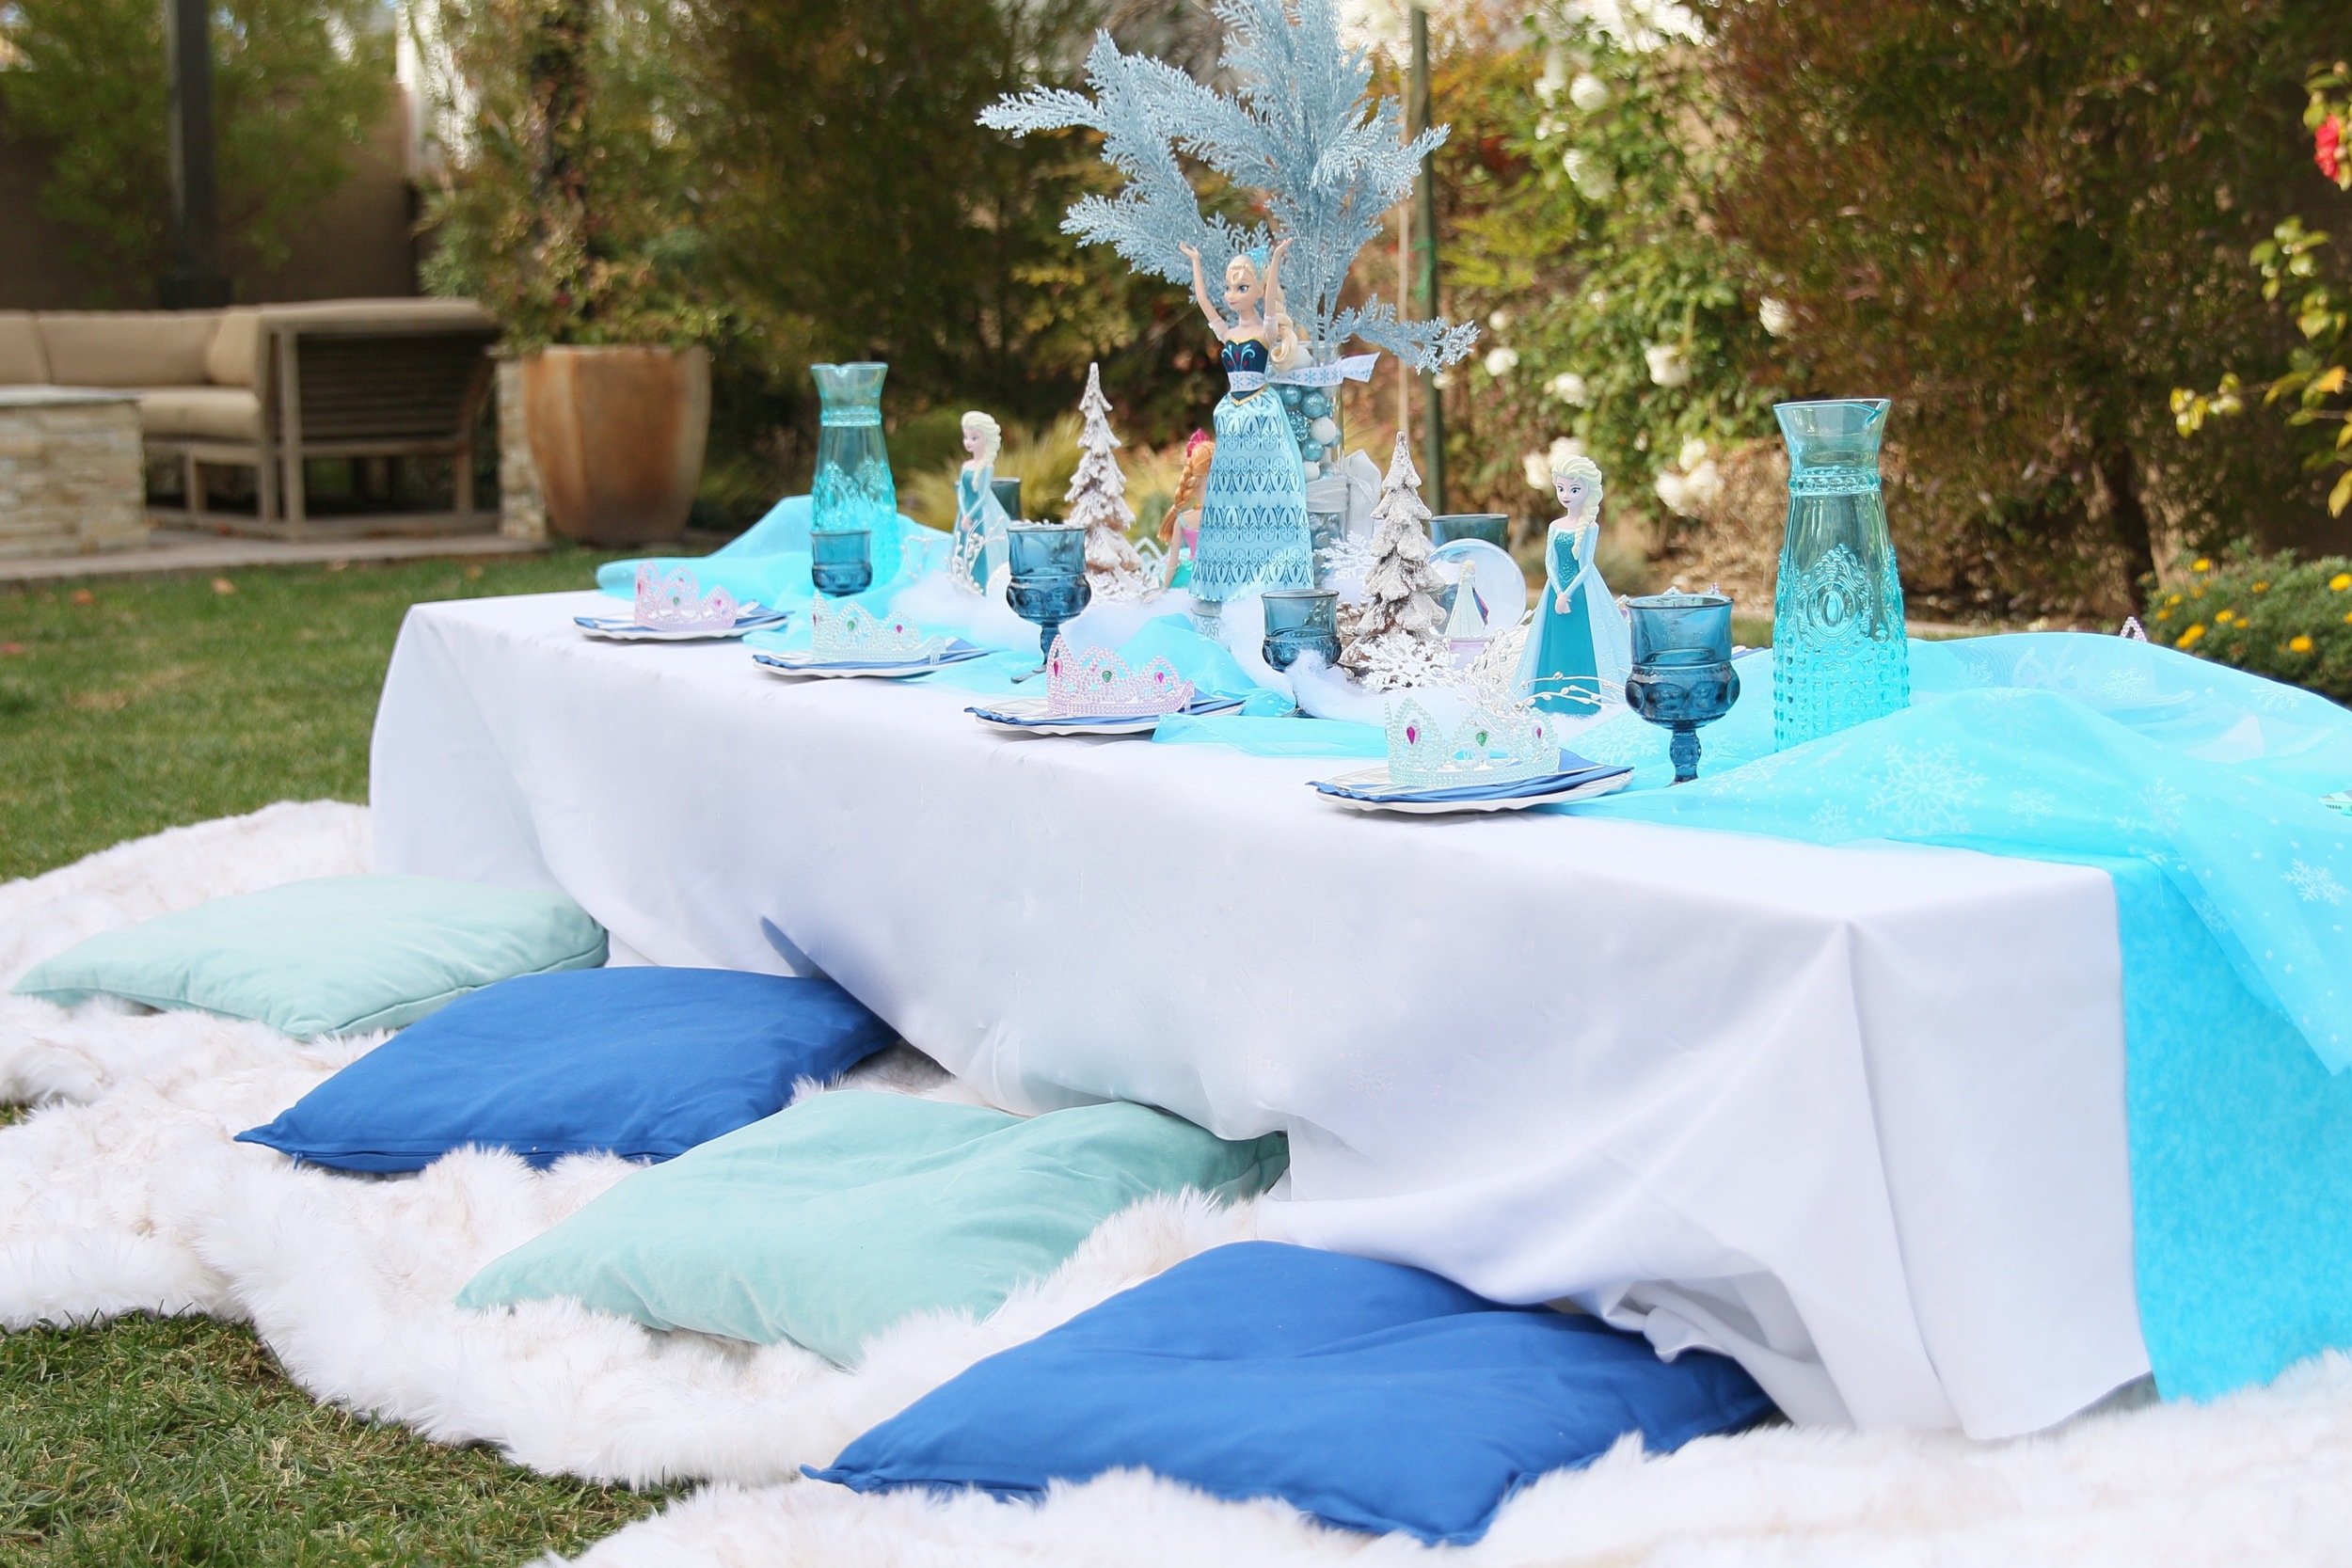 Copy of Plush floor seating for rent for a FROZEN party! @inJOYtheParty